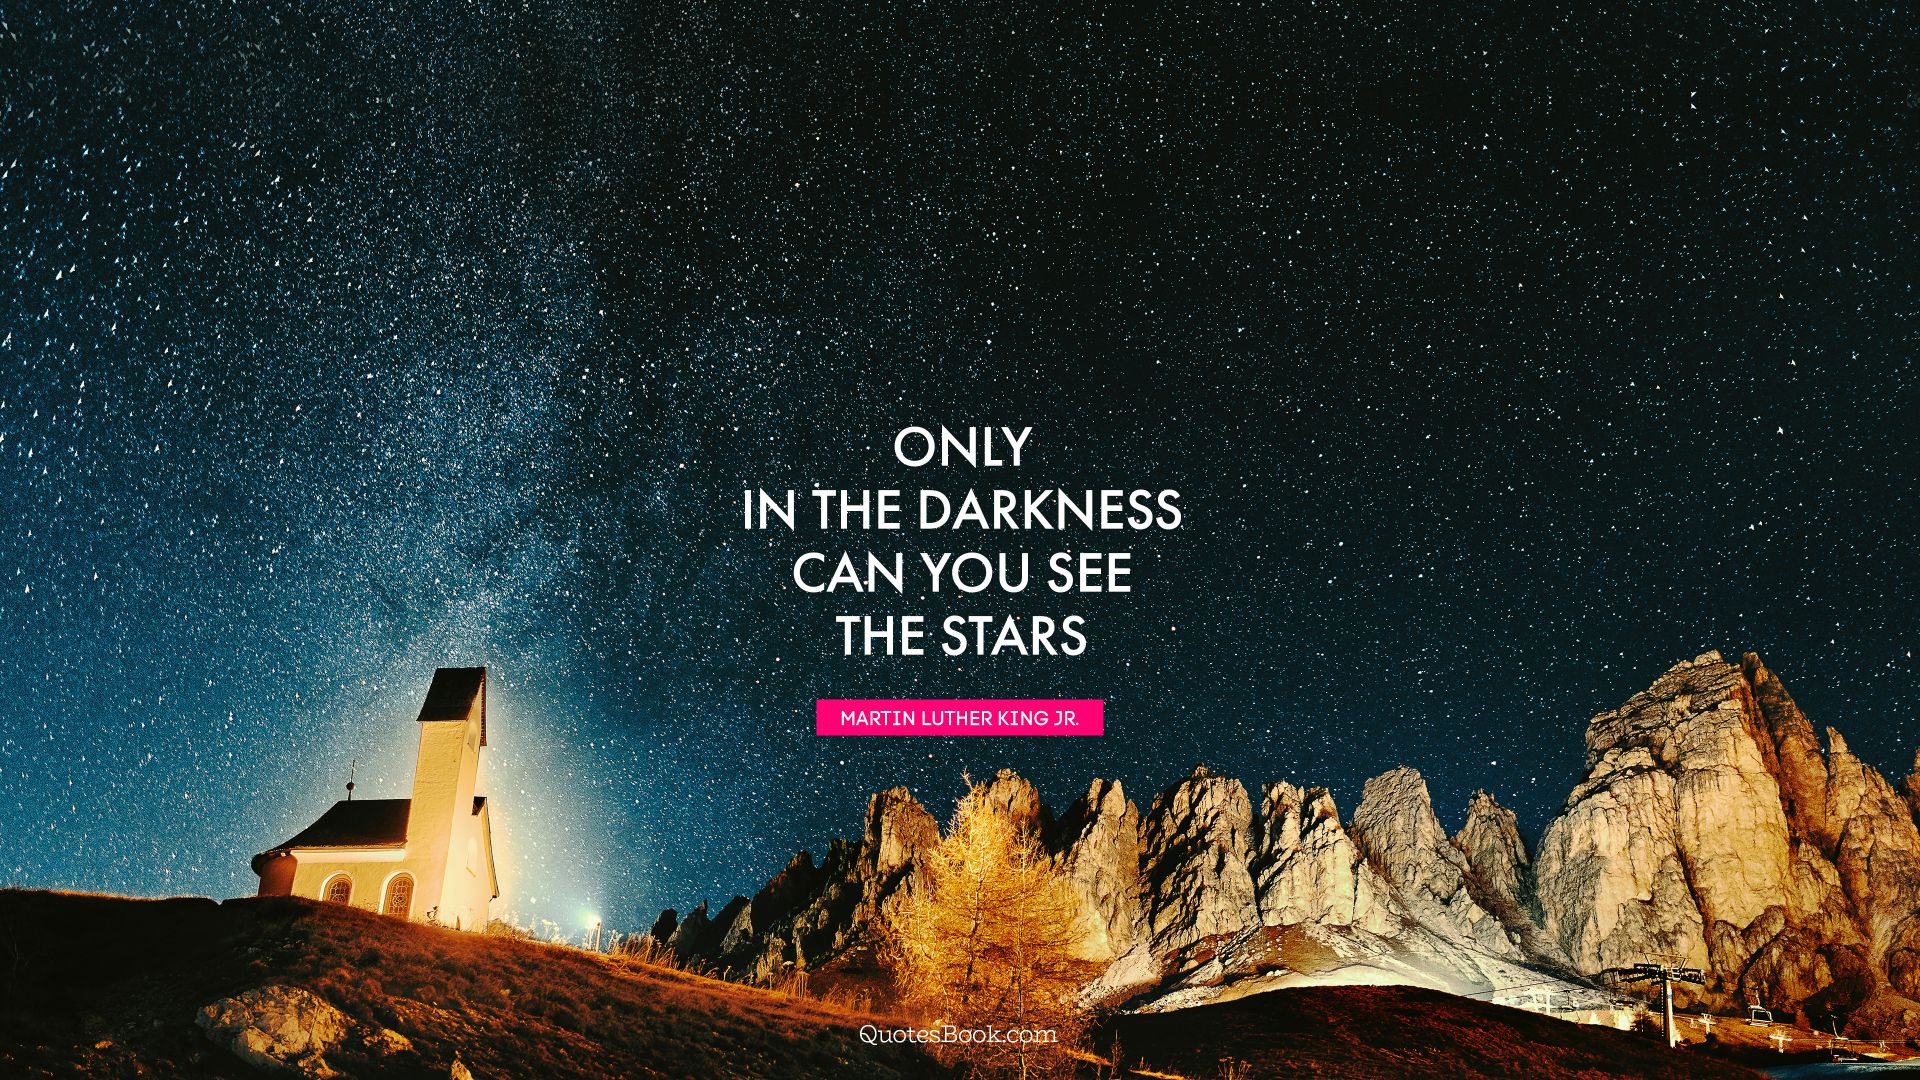 Only in the darkness can you see the stars. - Quote by Martin Luther King, Jr.